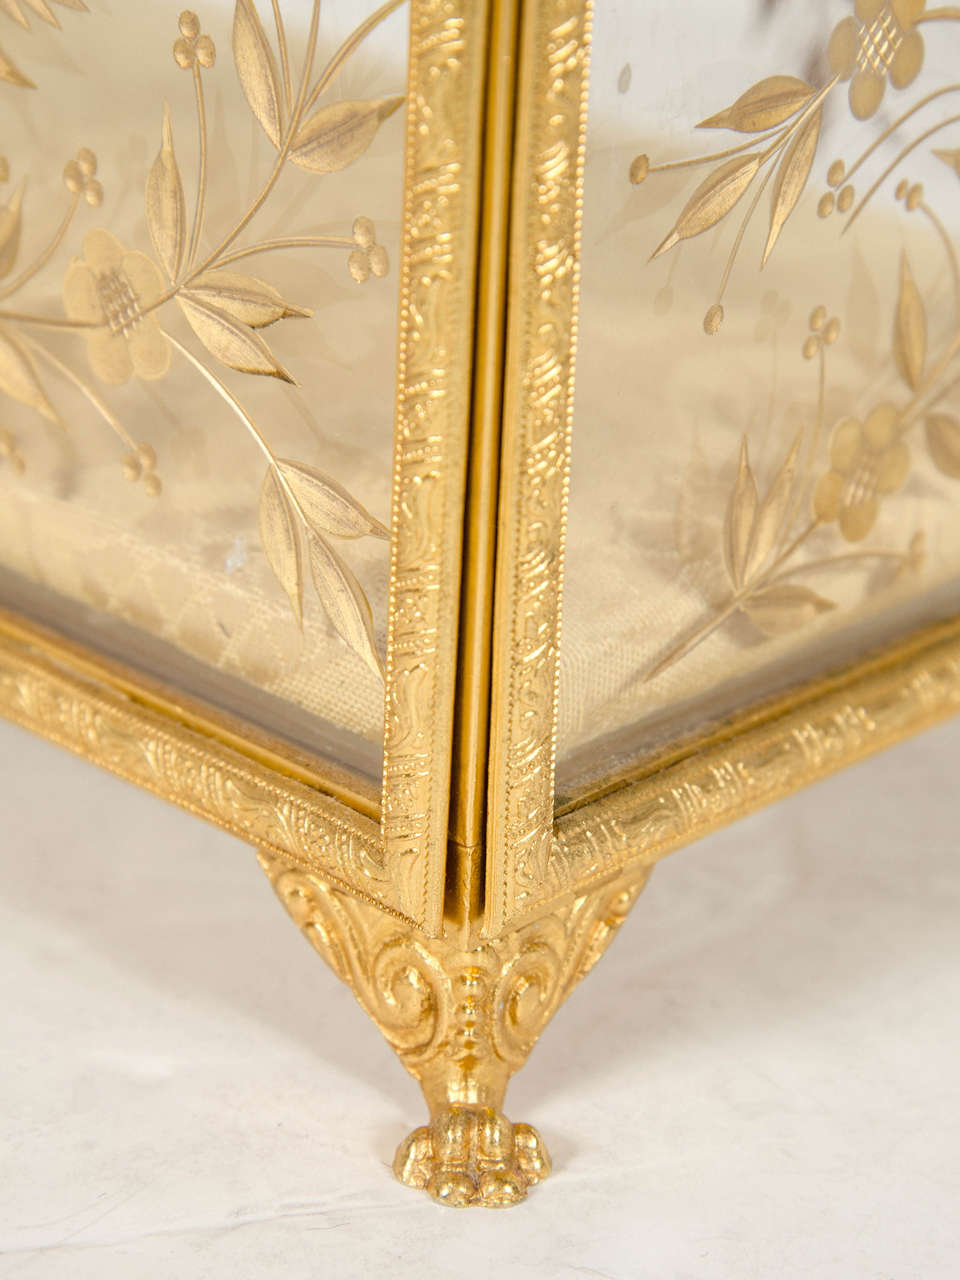 Exquisite French Empire Bronze Ormolu Mounted Crystal Box 3